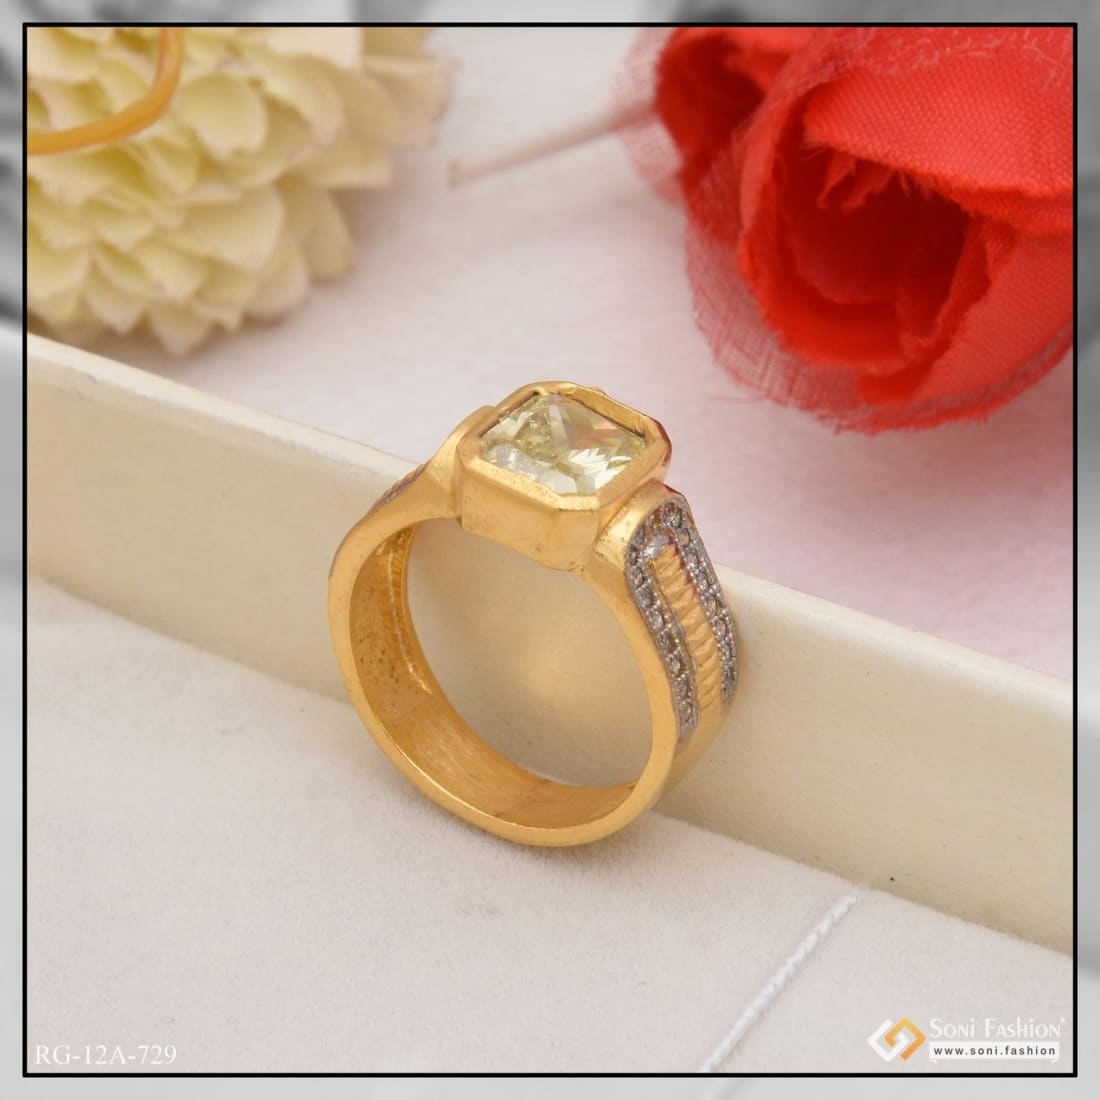 Simple Design Round Cut Stone Clear Quartz Gold Plated Adjustable Ring For  Women | eBay